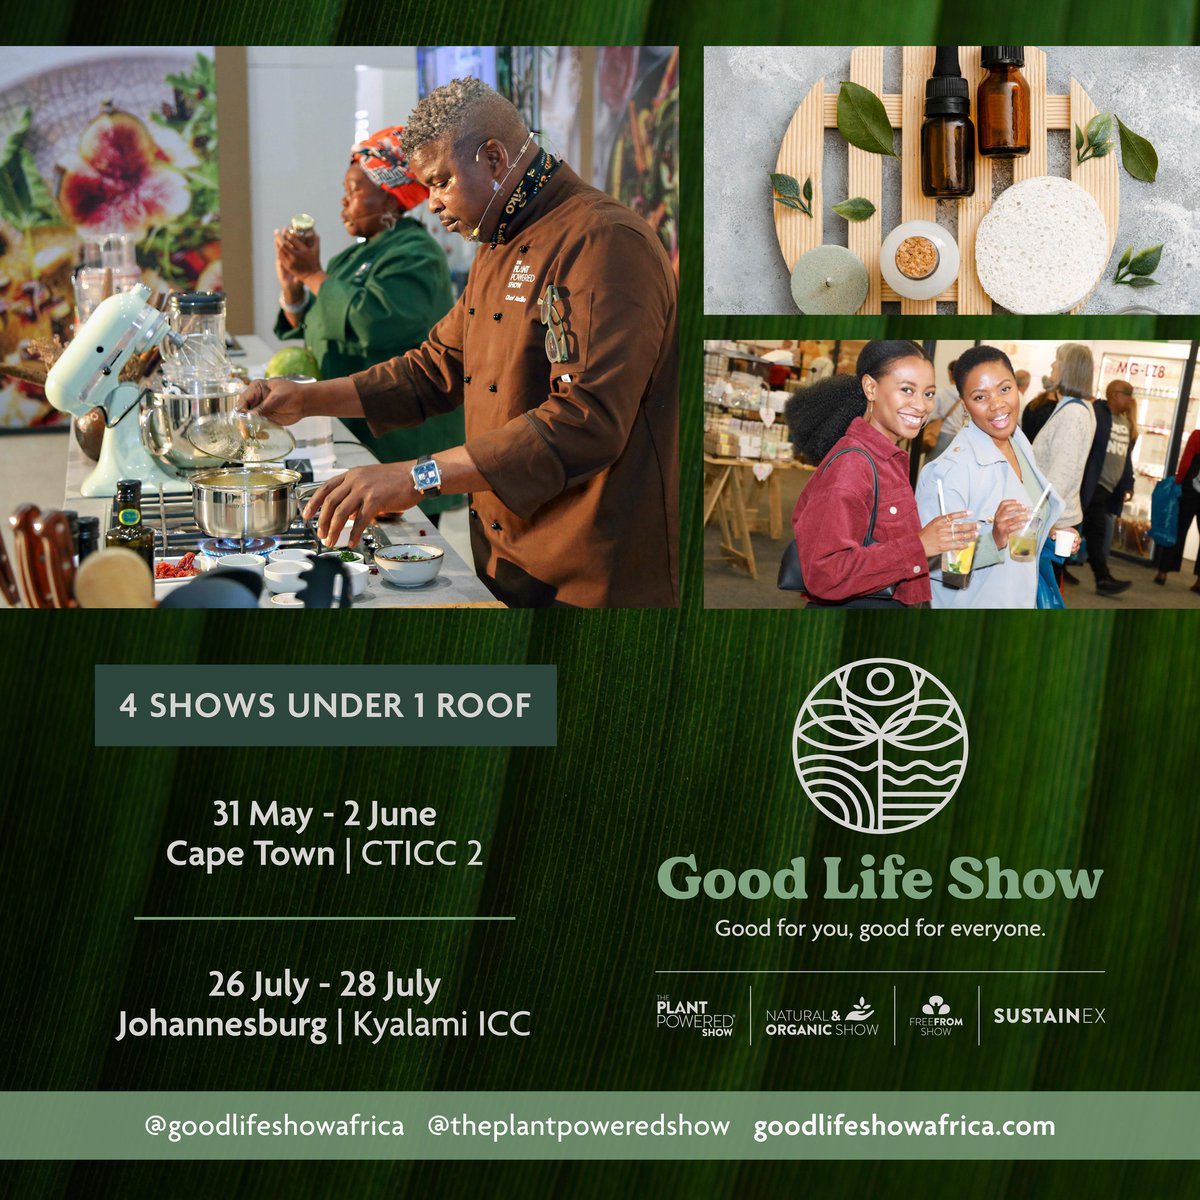 When it comes to The Good Life Show, event producer, Heidi Warricker says: “We are the frontrunners in this event space, and we are extremely excited to once again be bringing an event of this magnitude to the wider audience.'